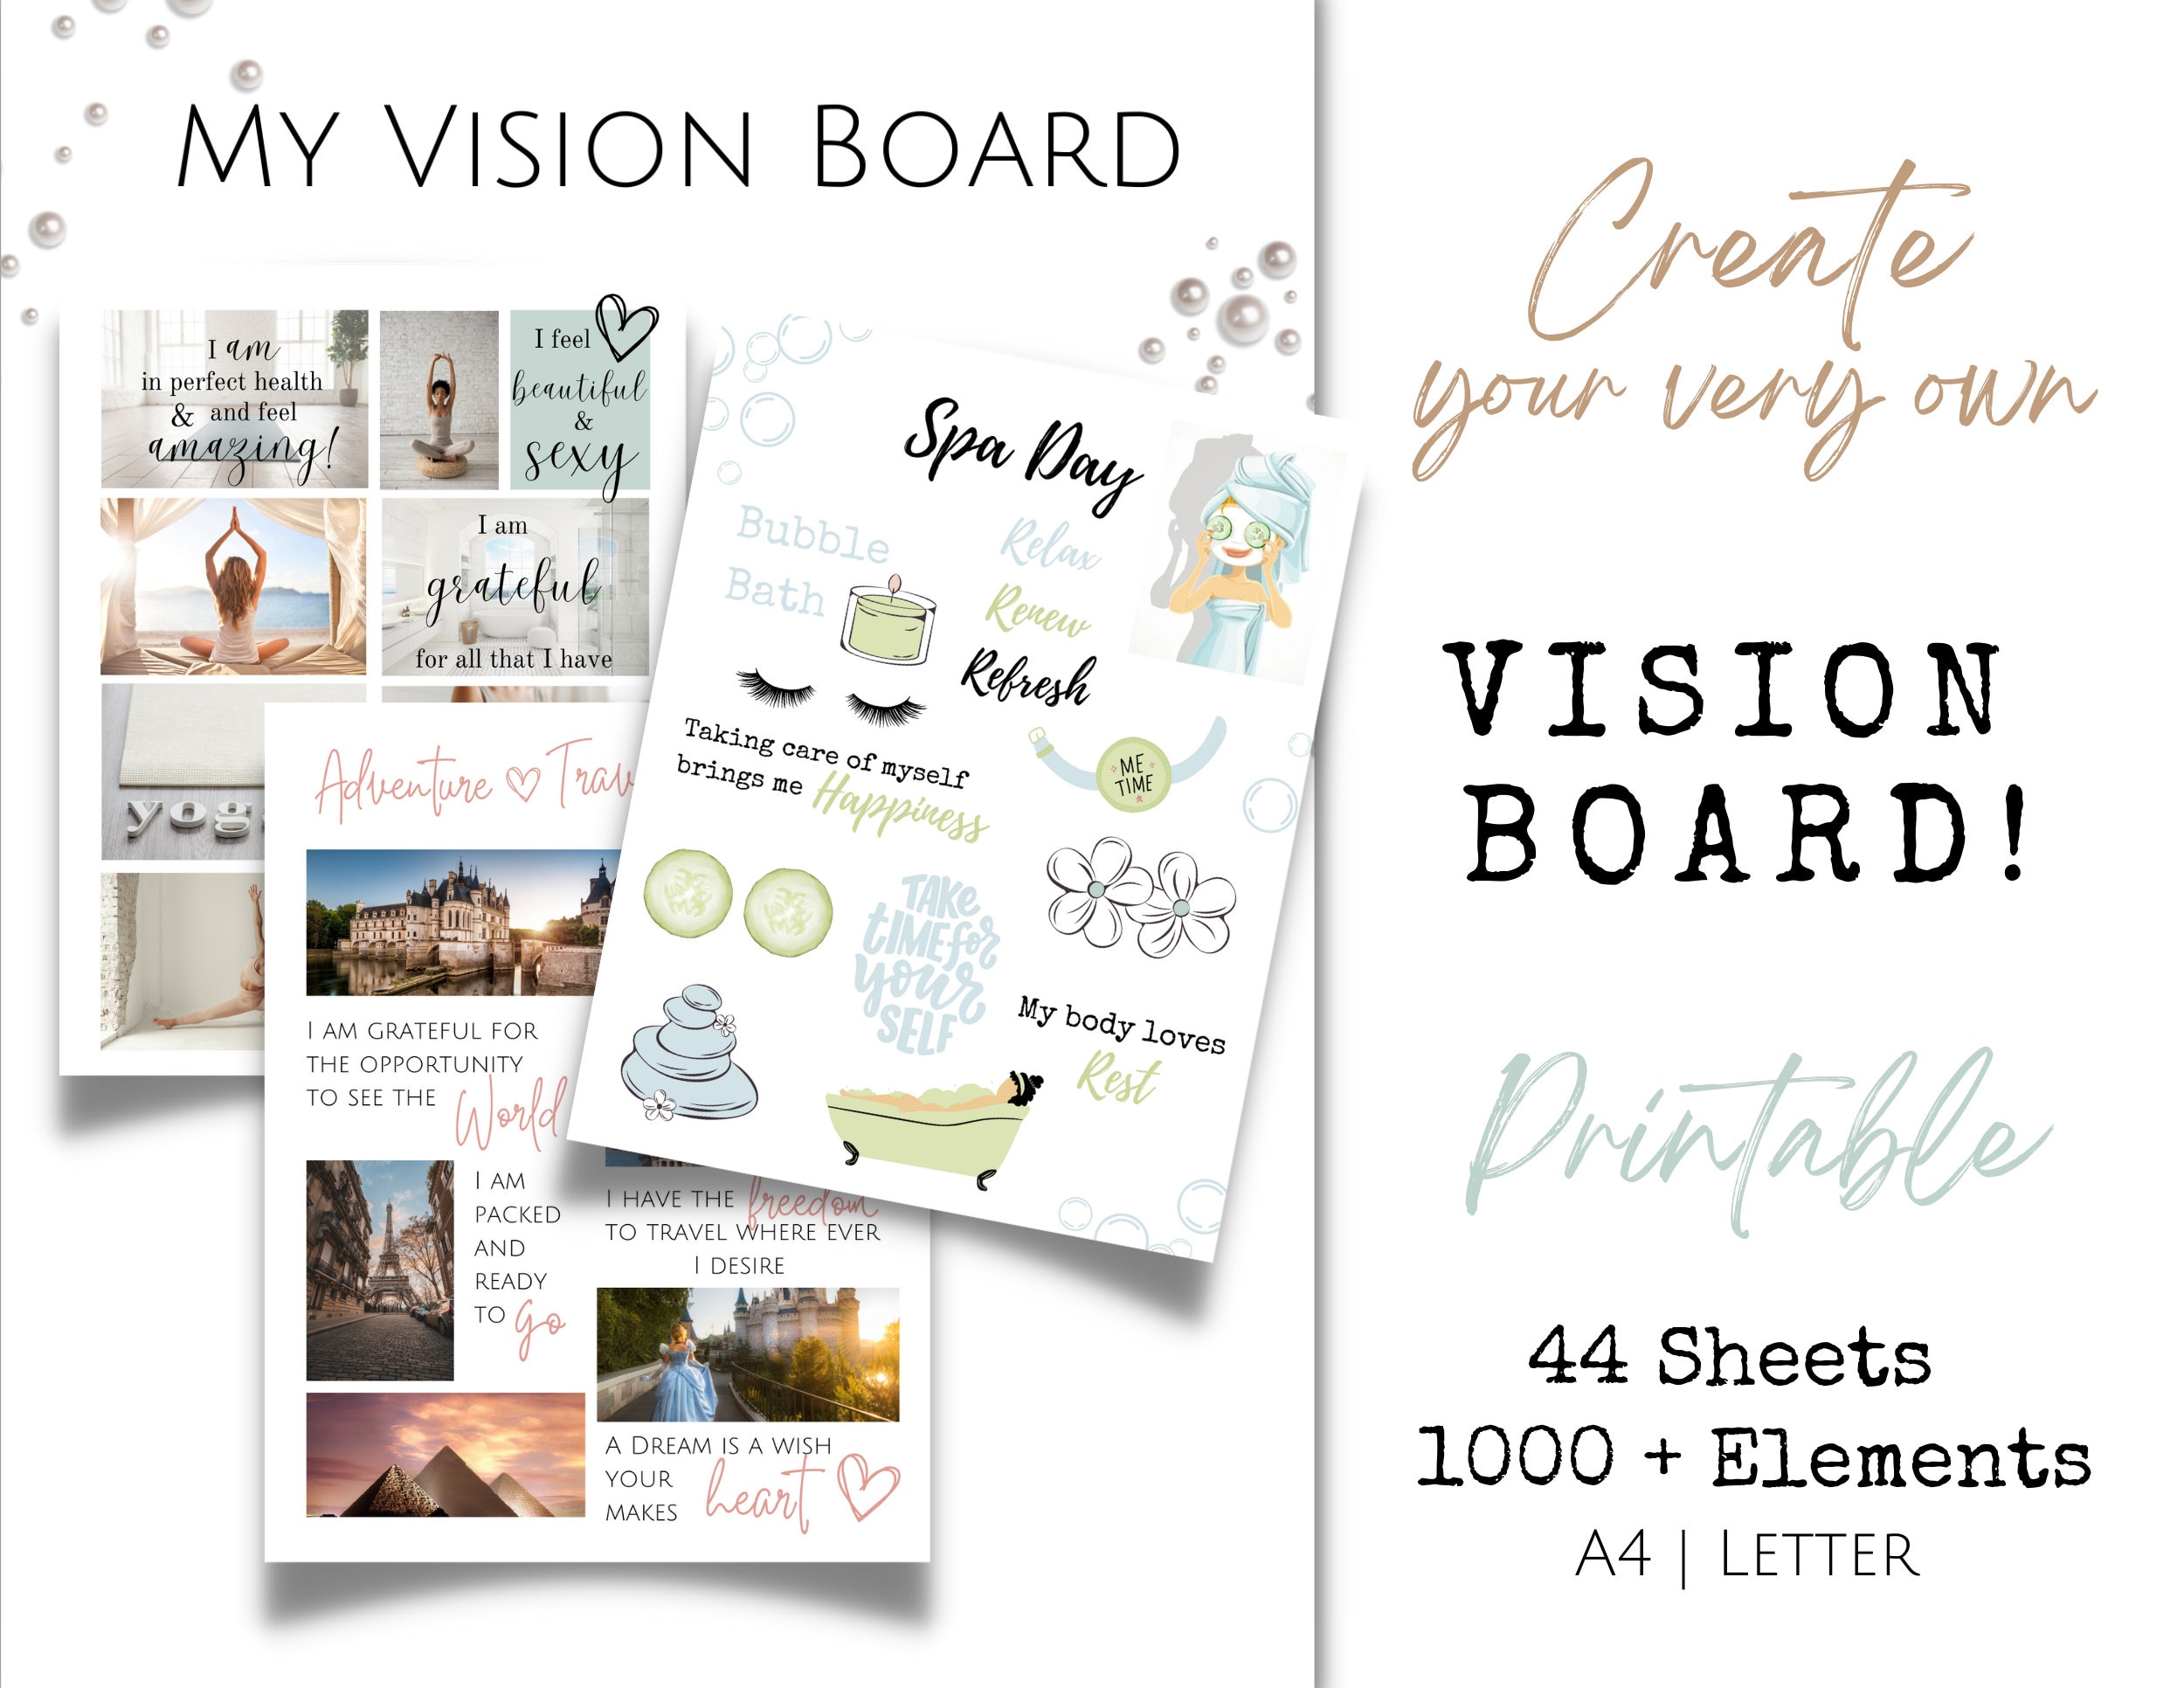 Magnificent Vision Board Kit - Create a Vision for India